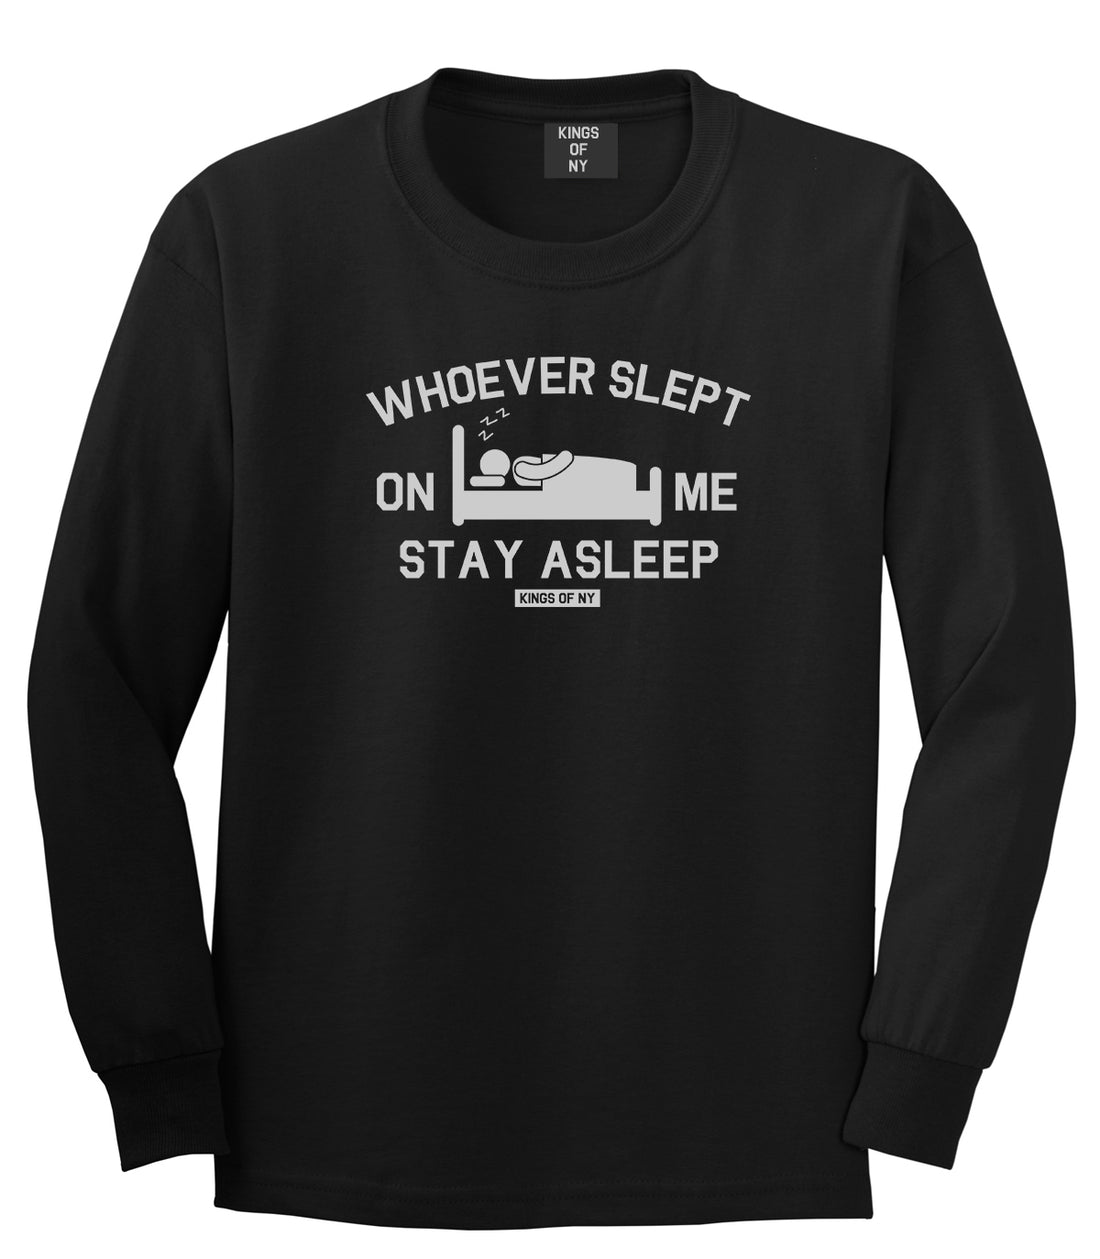 Whoever Slept On Me Stay Asleep Mens Long Sleeve T-Shirt Black by Kings Of NY